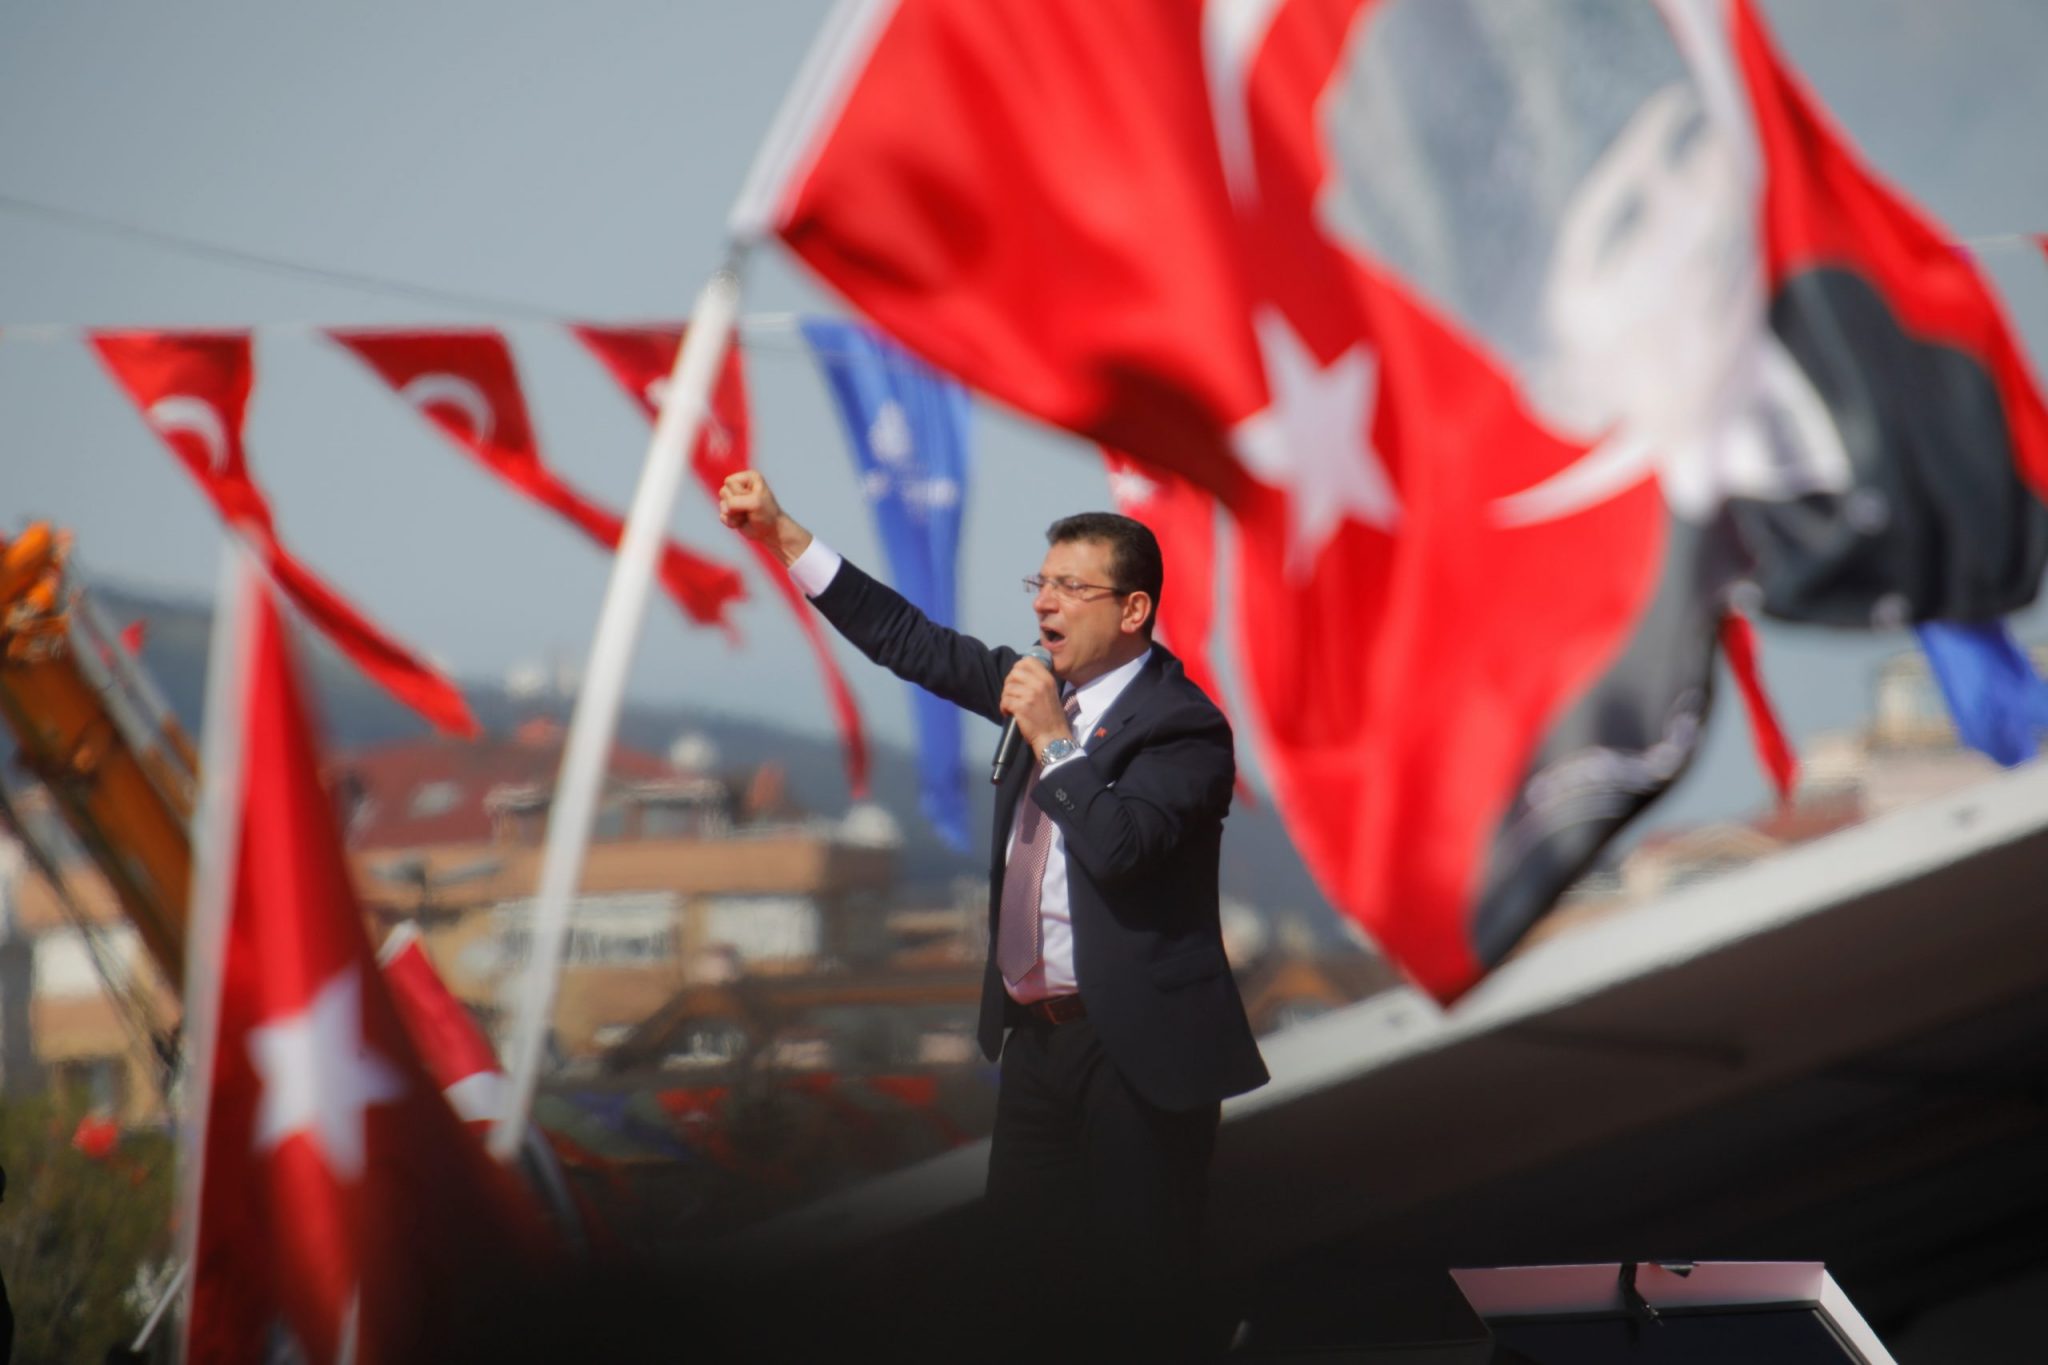 Mayor of Istanbul Ekrem Imamoglu of the main opposition Republican People's Party (CHP) addresses his supporters during a rally in Istanbul, Turkey, April 21, 2019.